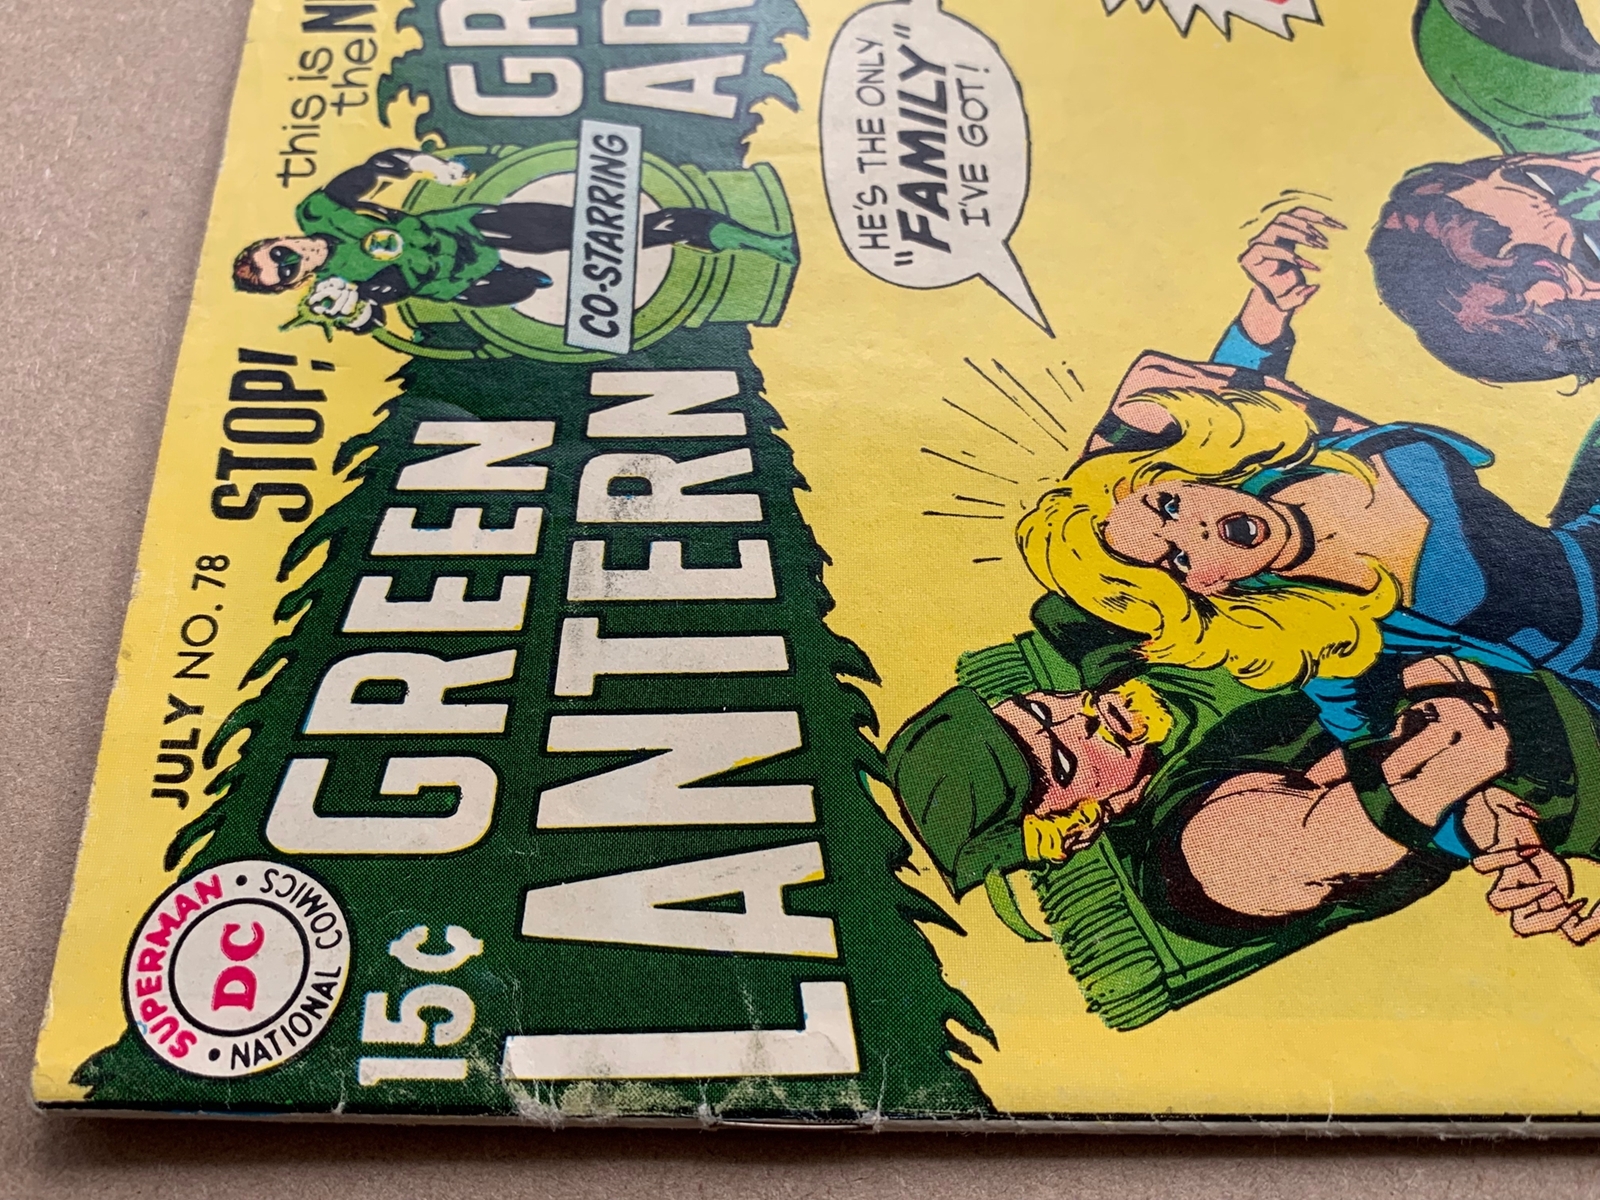 GREEN LANTERN #78 (1970 - DC) VFN (Cents Copy/Pence Stamp) - Black Canary appearances begin. Neal - Image 4 of 11